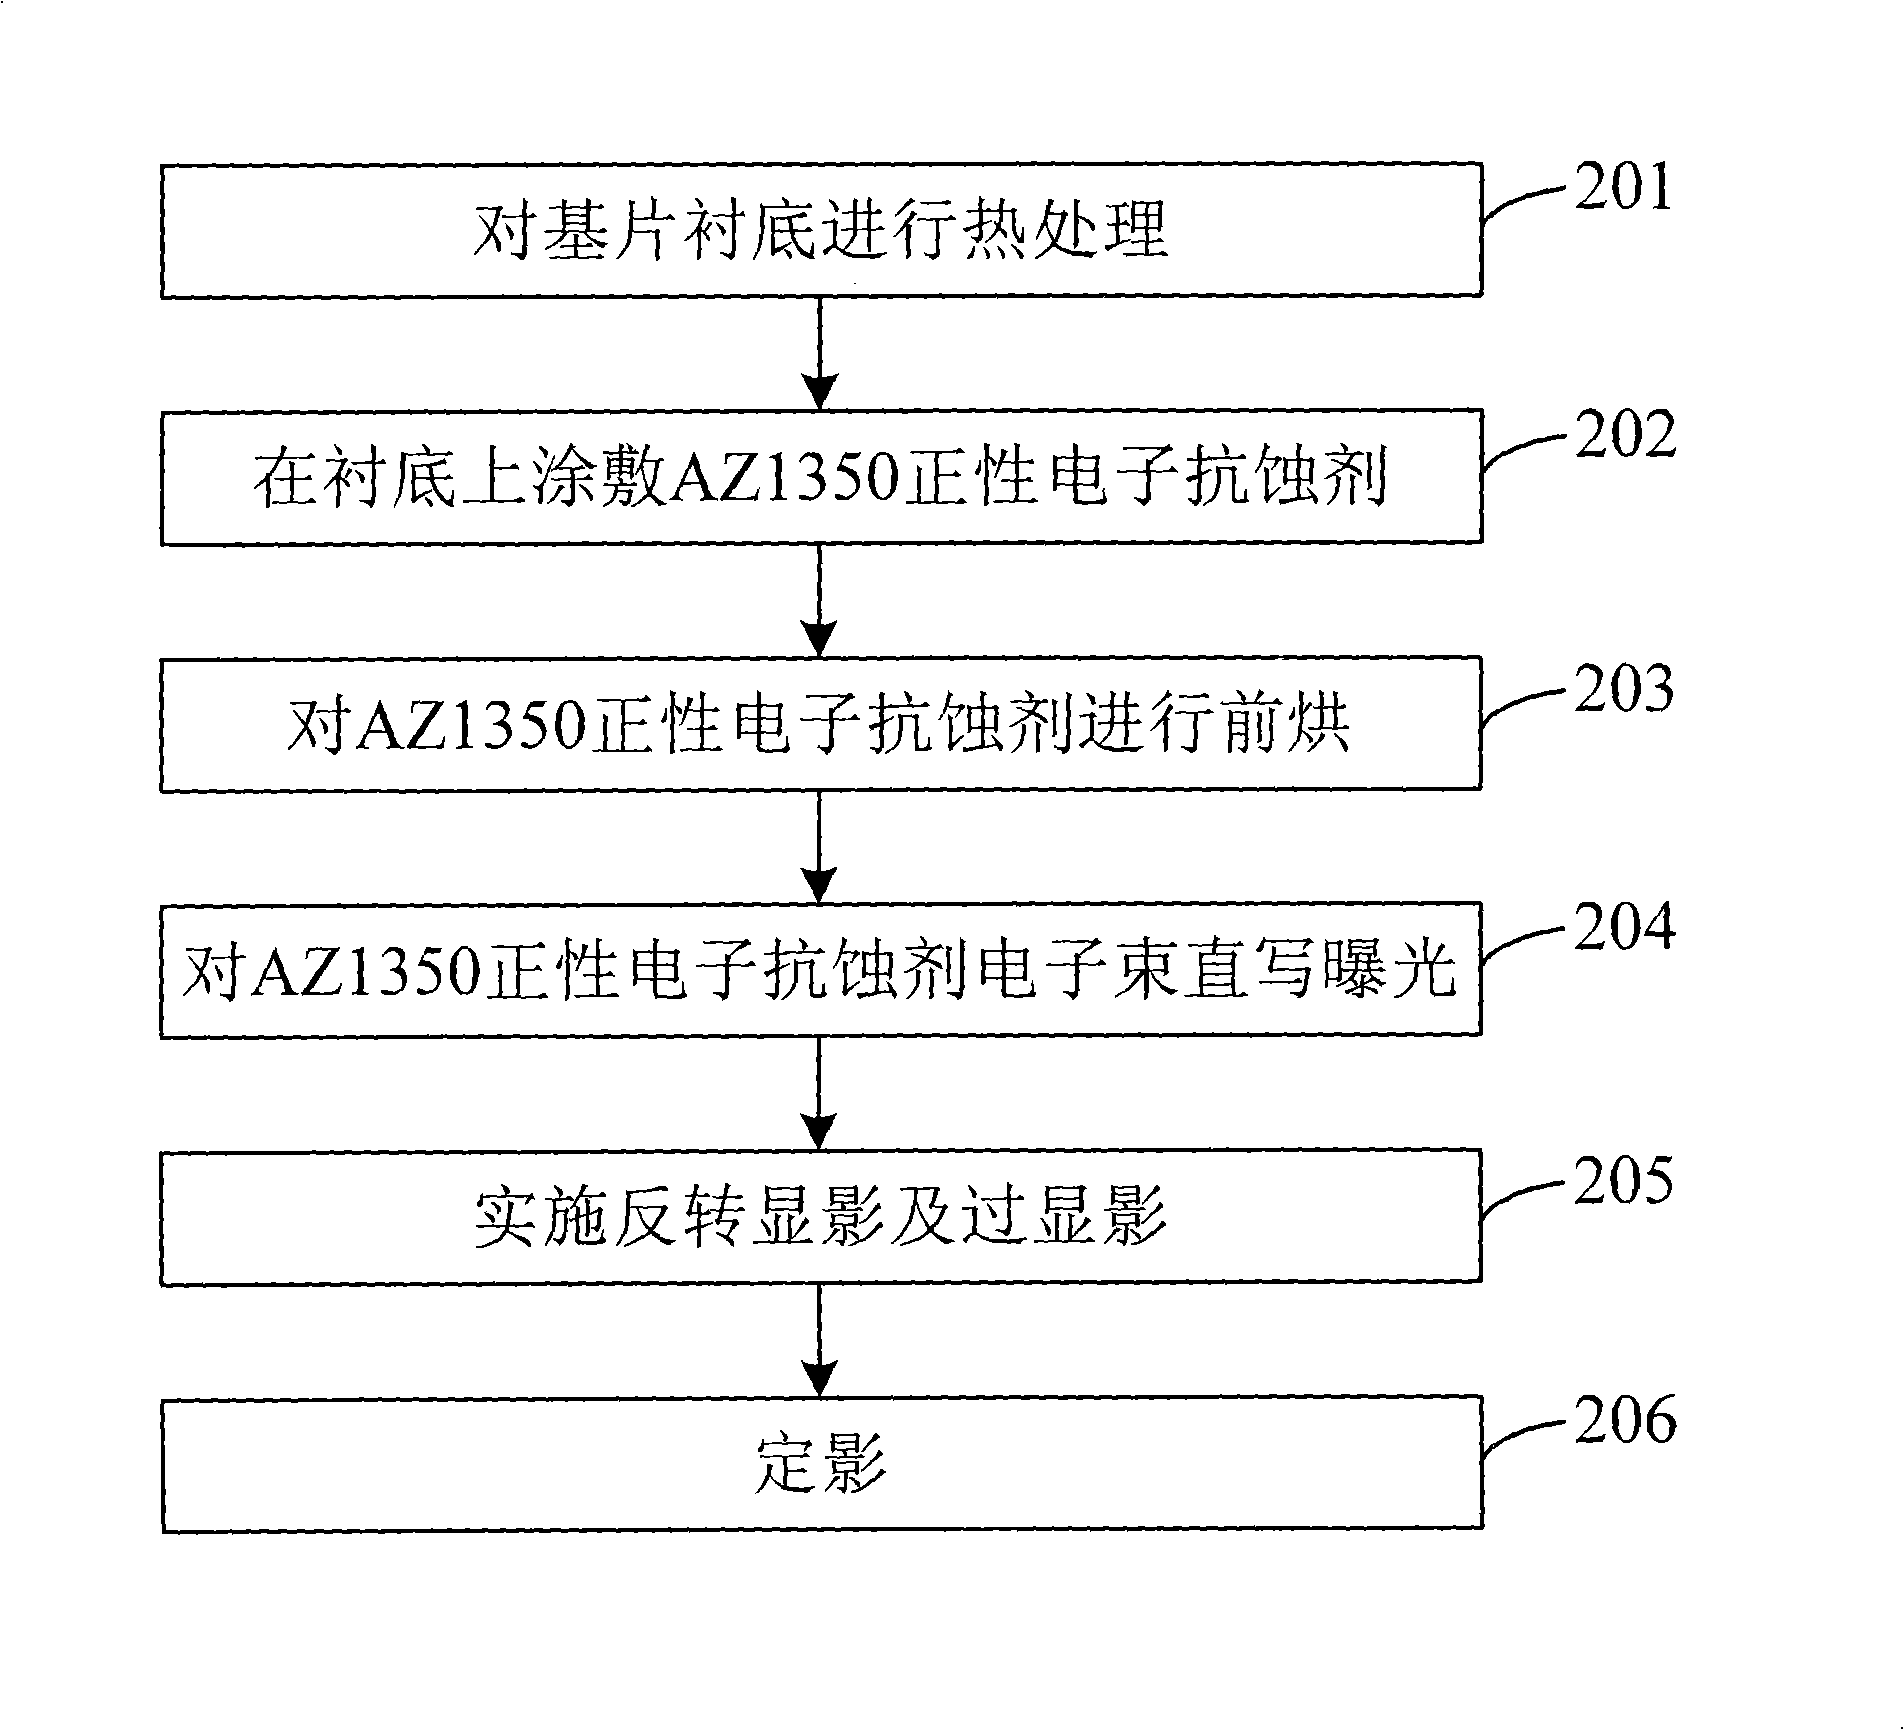 Method for manufacturing hundred nano-scale electric solenoid or net-shaped structure